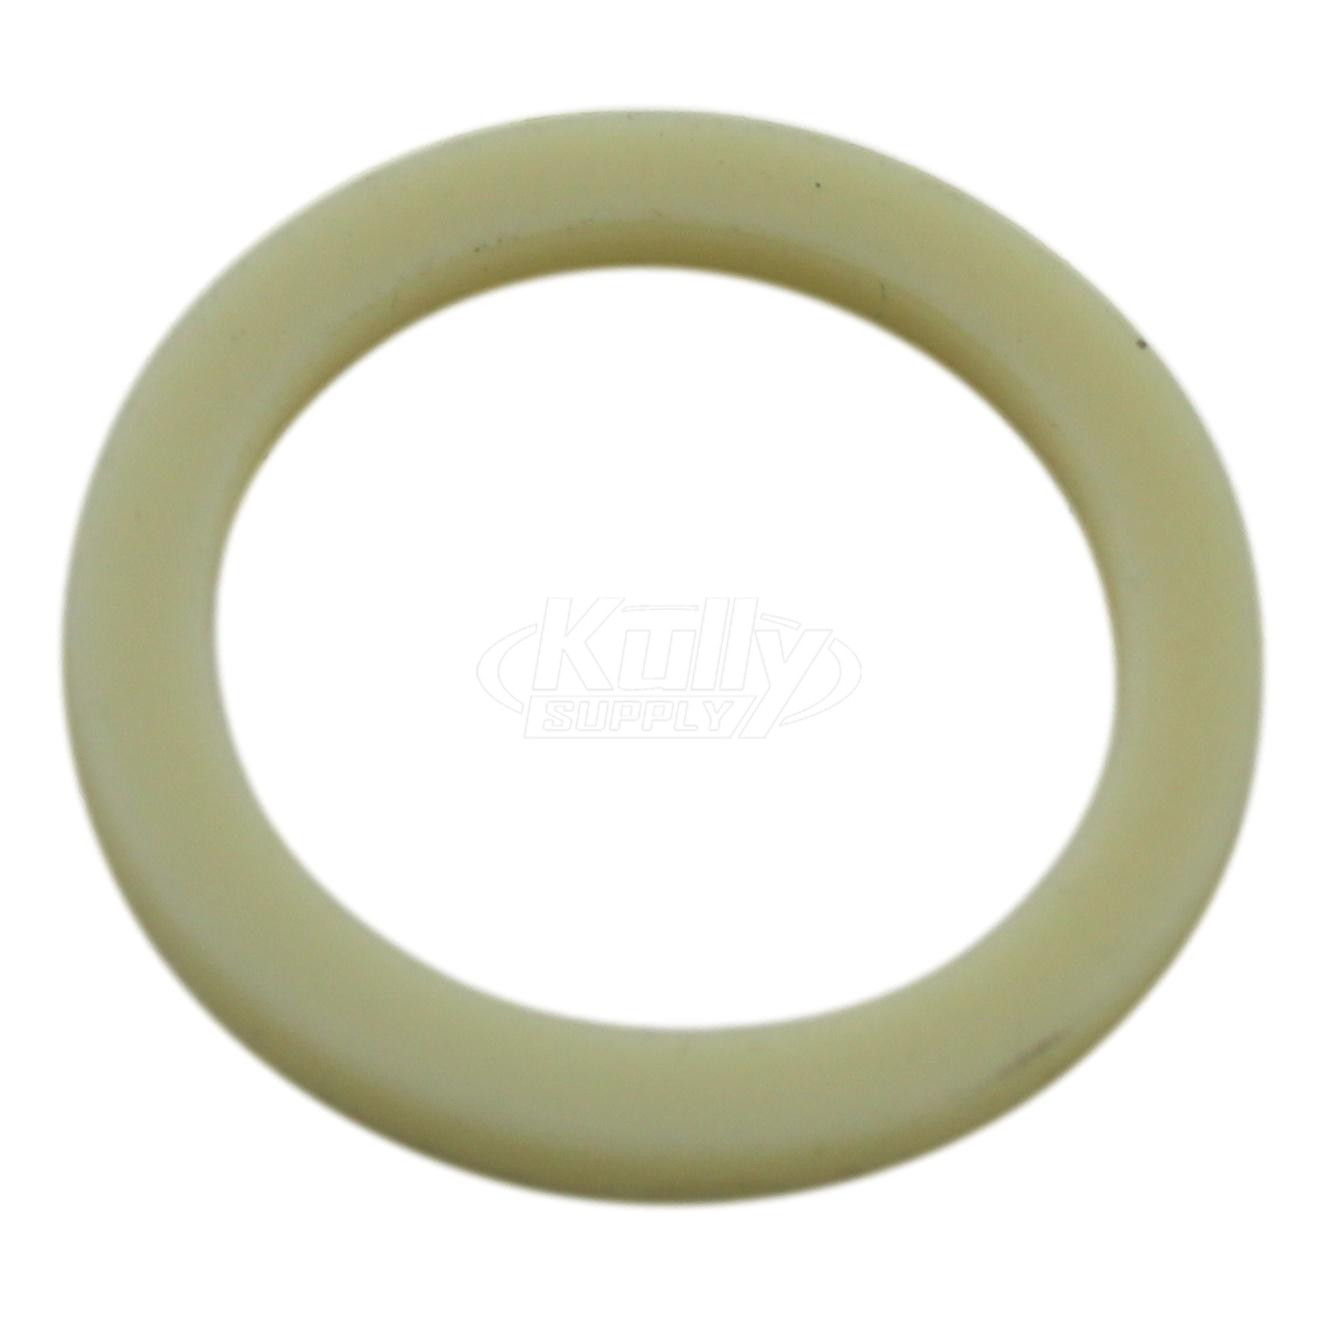 T&S Brass 001048-45 Nozzle Tip Washer